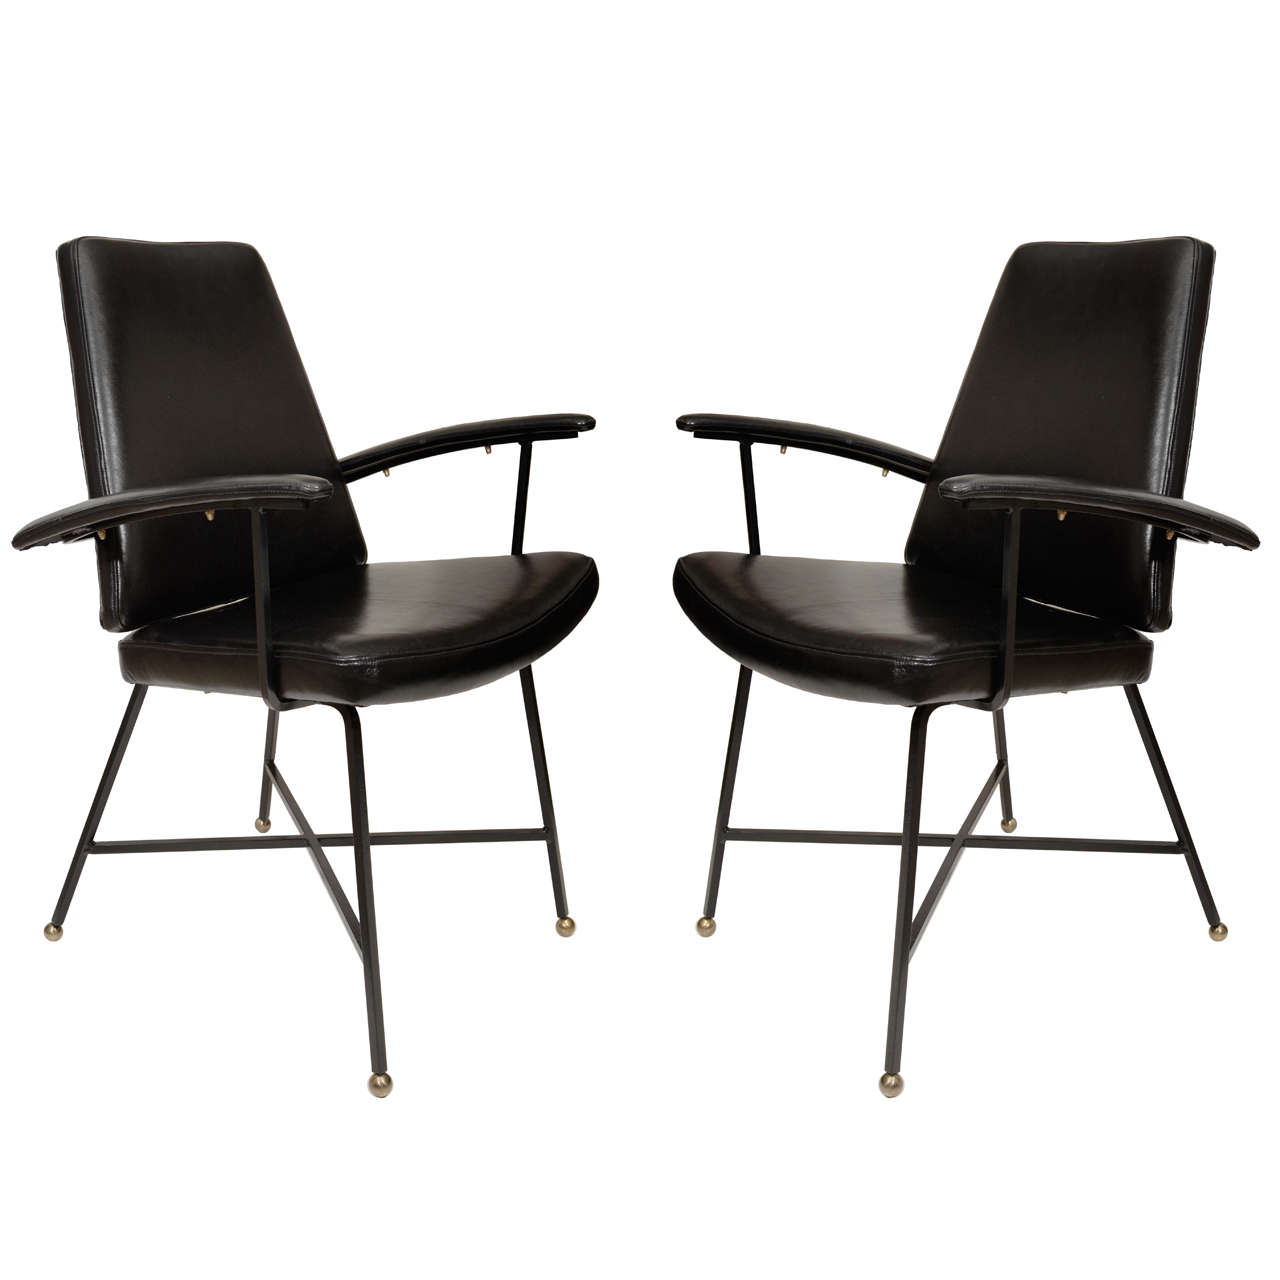 Pair of lacquered metal and leather armchairs by Jacques Quinet. For Sale